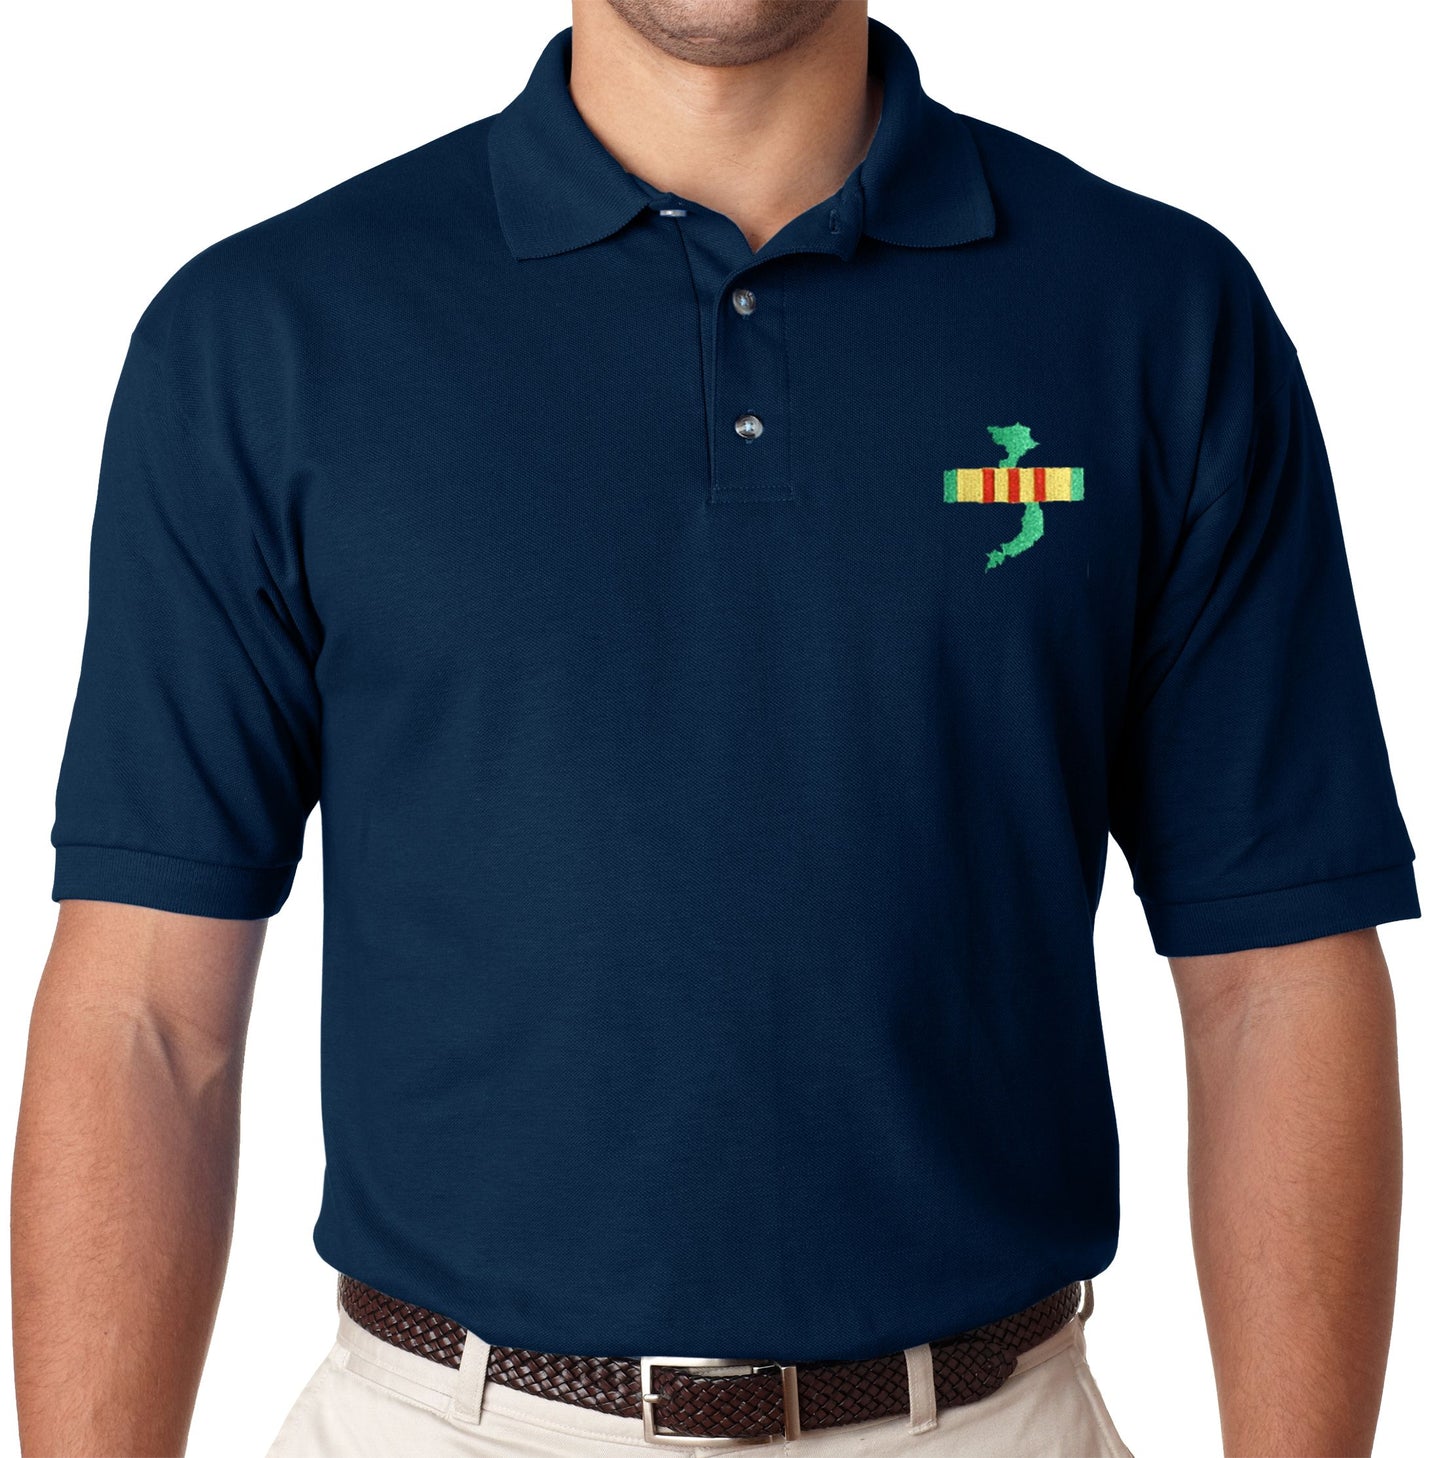 Vietnam Veteran Campaign Ribbon with Map on Polo Shirt